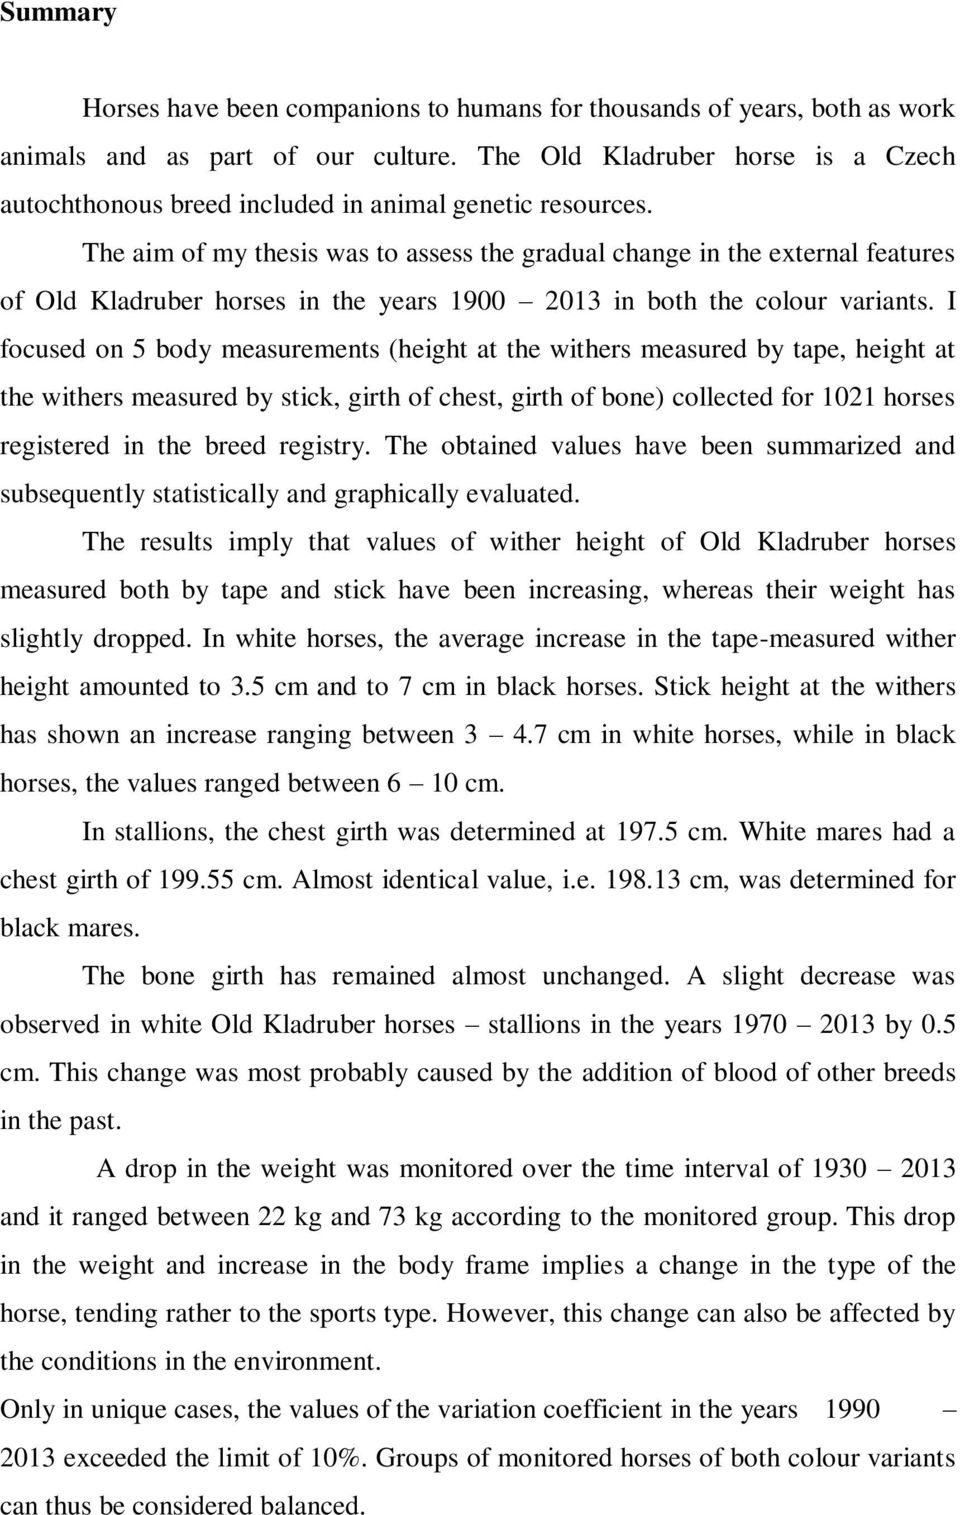 The aim of my thesis was to assess the gradual change in the external features of Old Kladruber horses in the years 1900 2013 in both the colour variants.